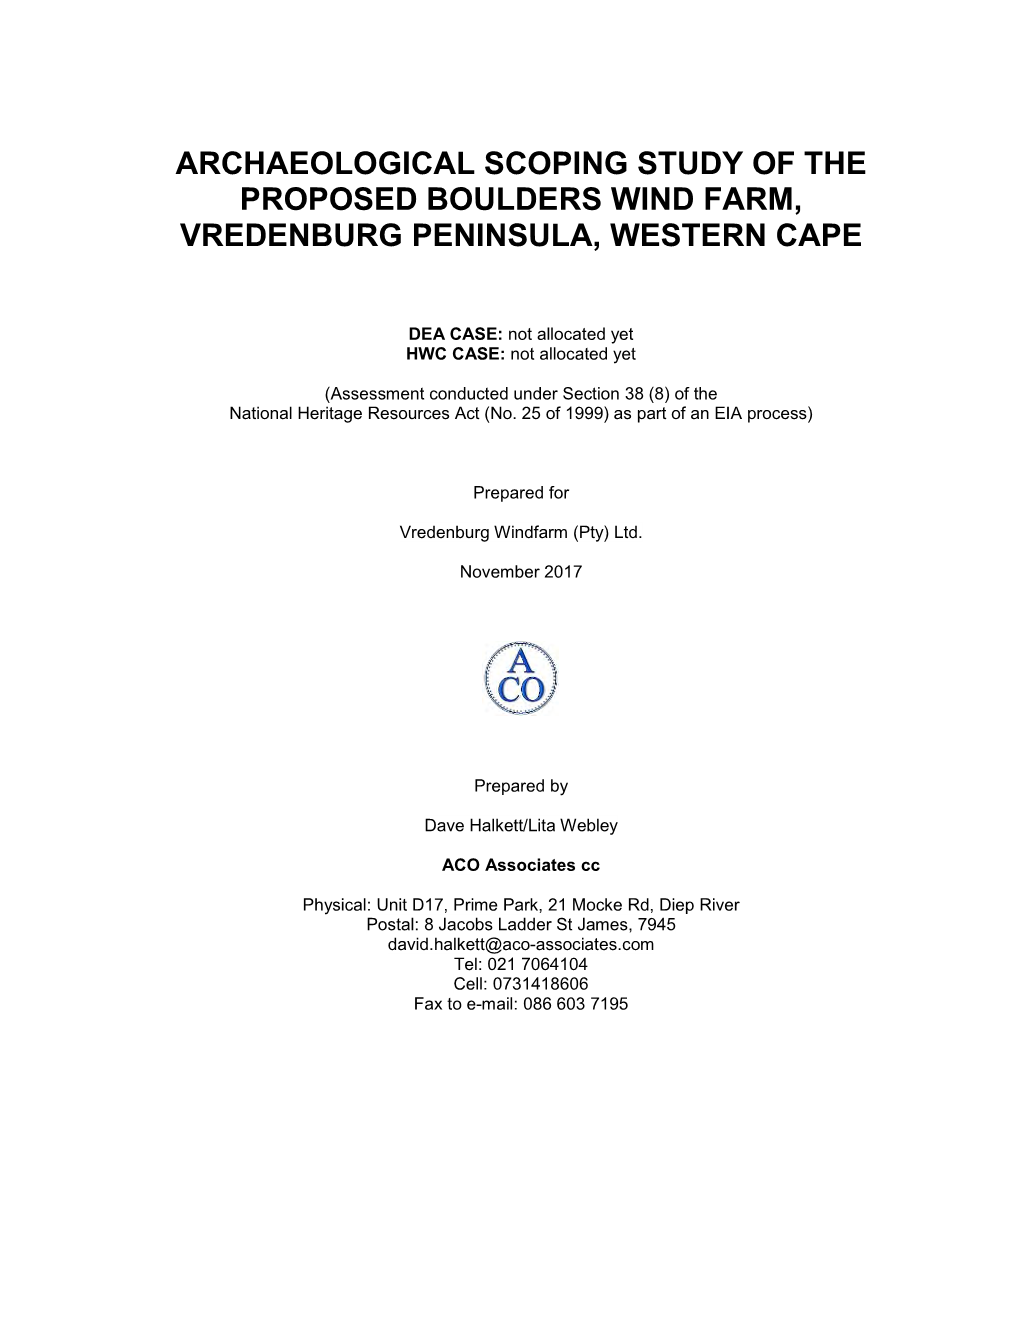 Archaeological Scoping Study of the Proposed Boulders Wind Farm, Vredenburg Peninsula, Western Cape